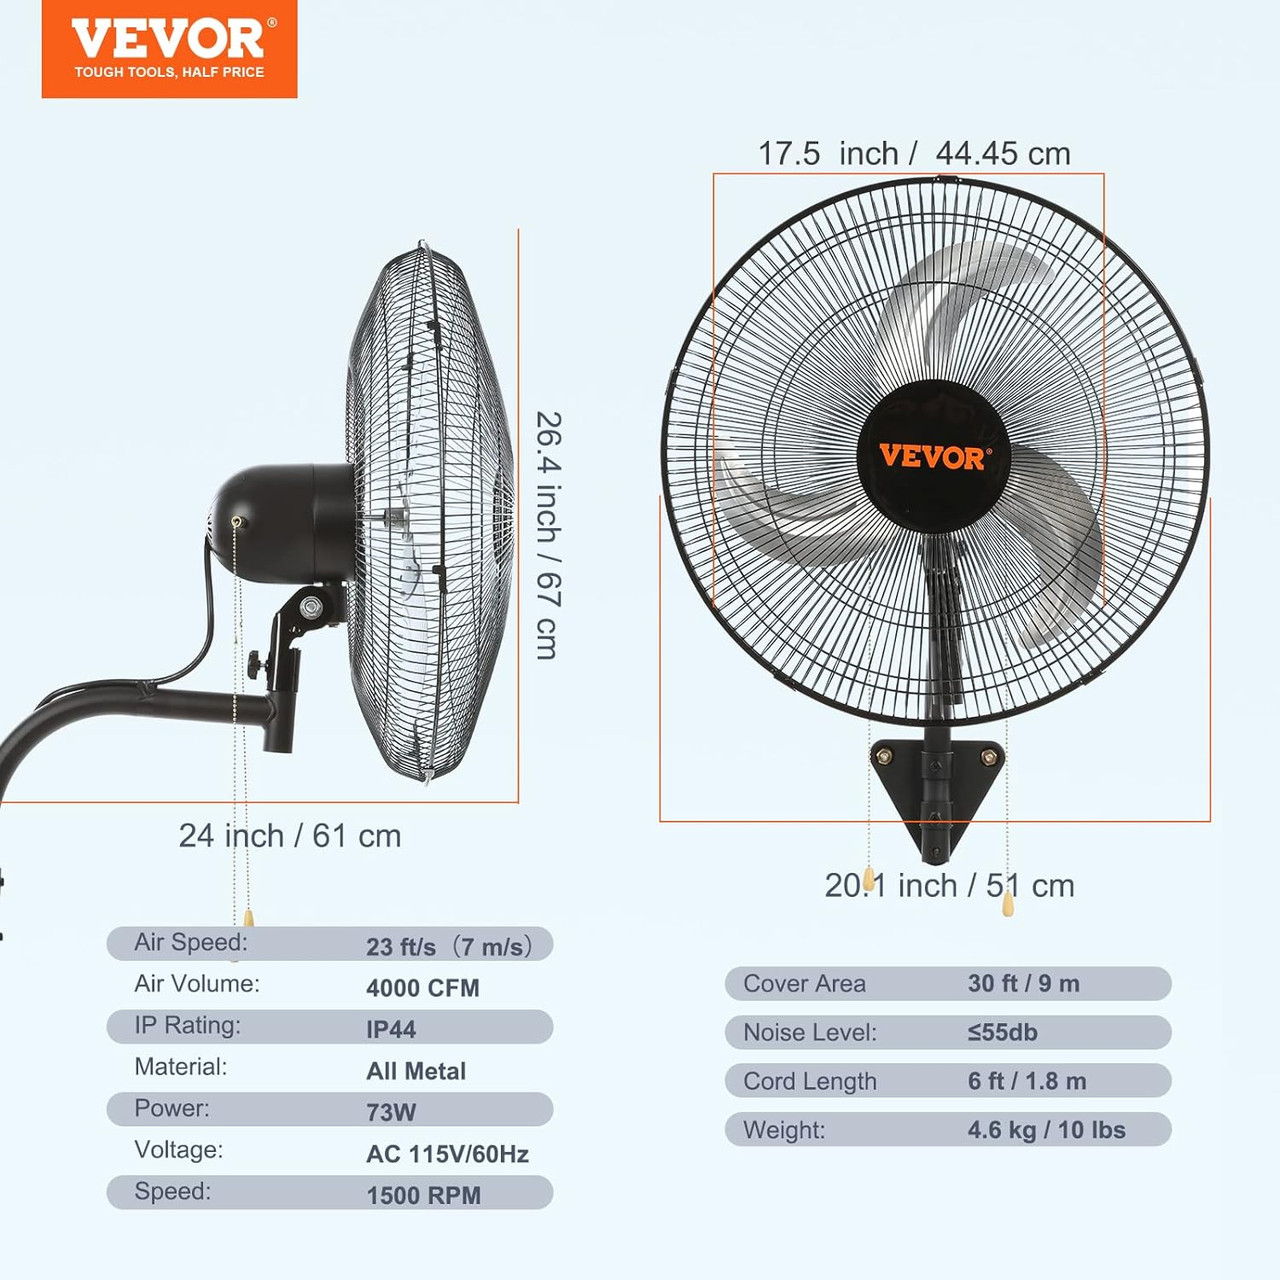 Wall-Mount Misting Fan, 30 Inch, 3-speed High Velocity Max. 9500 CFM, Waterproof Oscillating Industrial Wall Fan, Commercial or Residential for